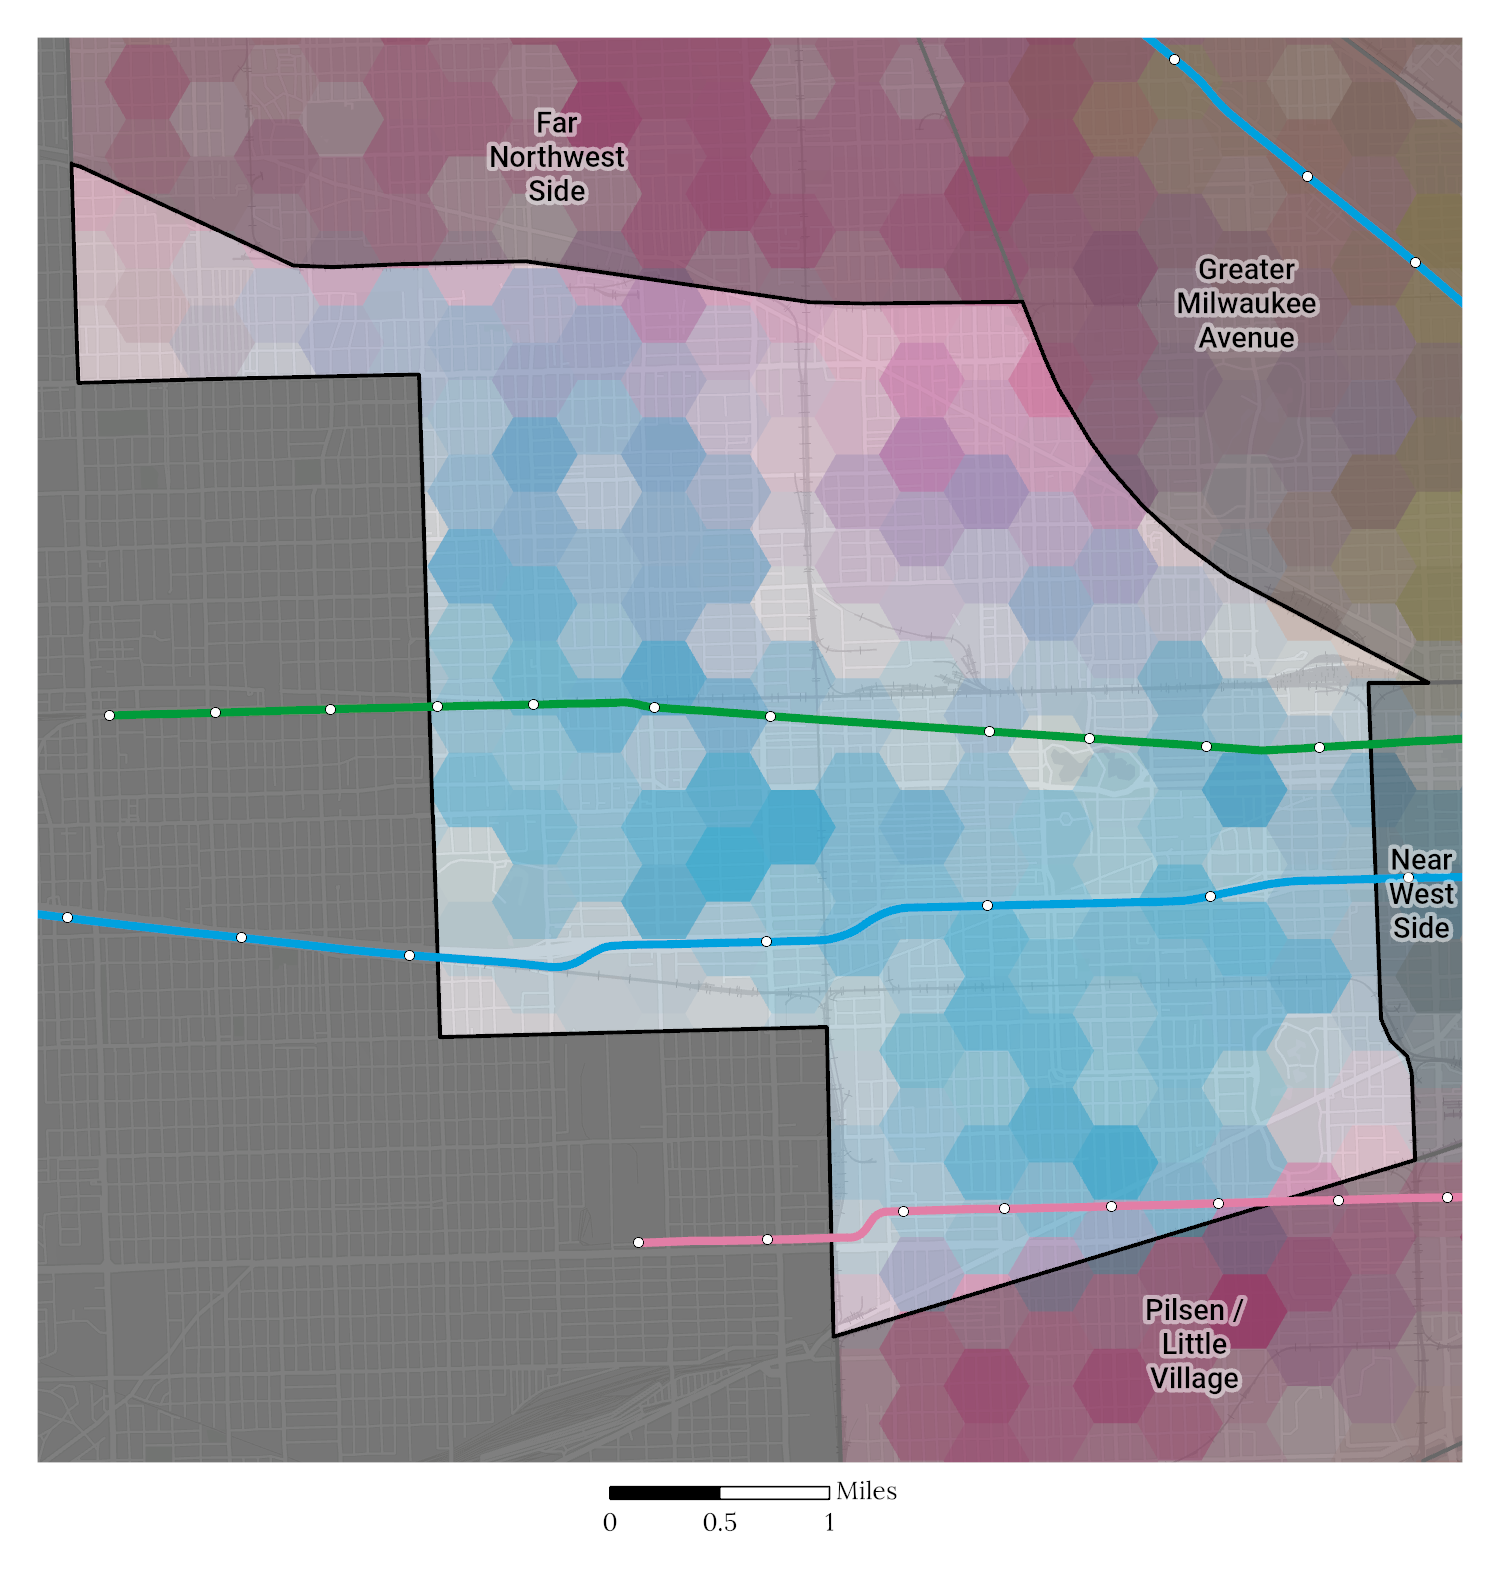 Racial and Ethnic composition map of the West Side